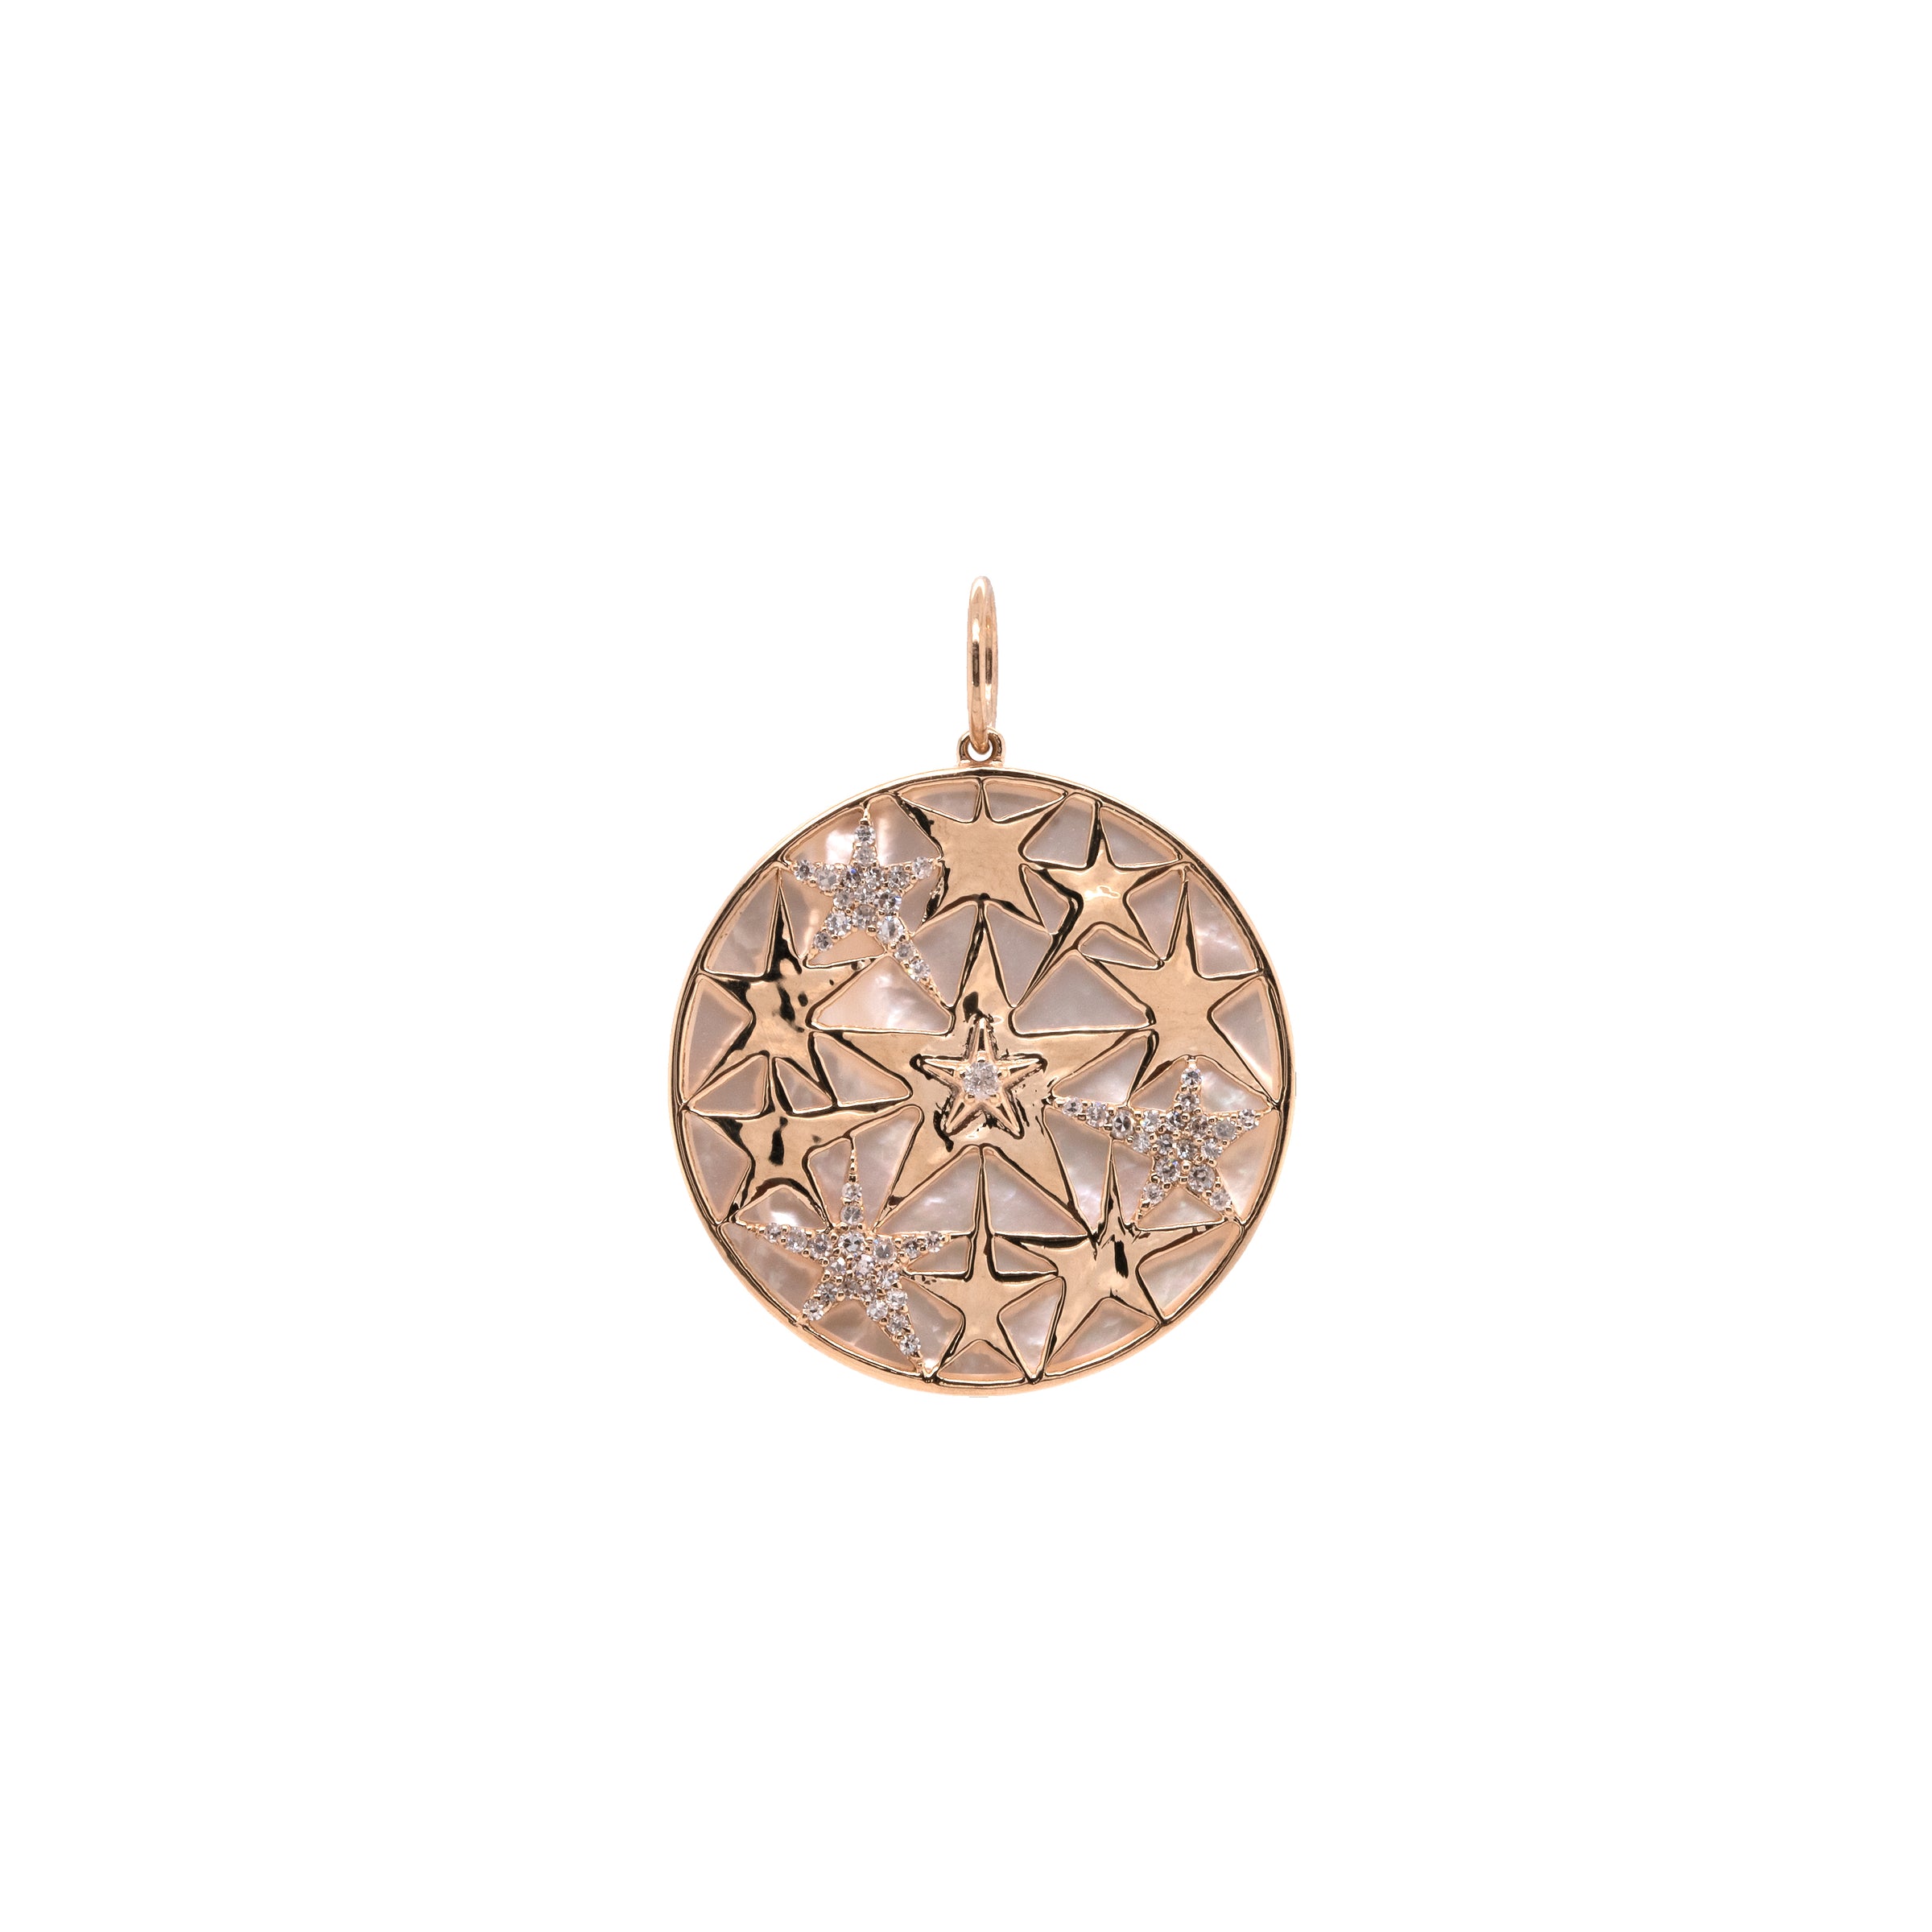 MOTHER-OF-PEARL CONSTELLATION MEDALLION